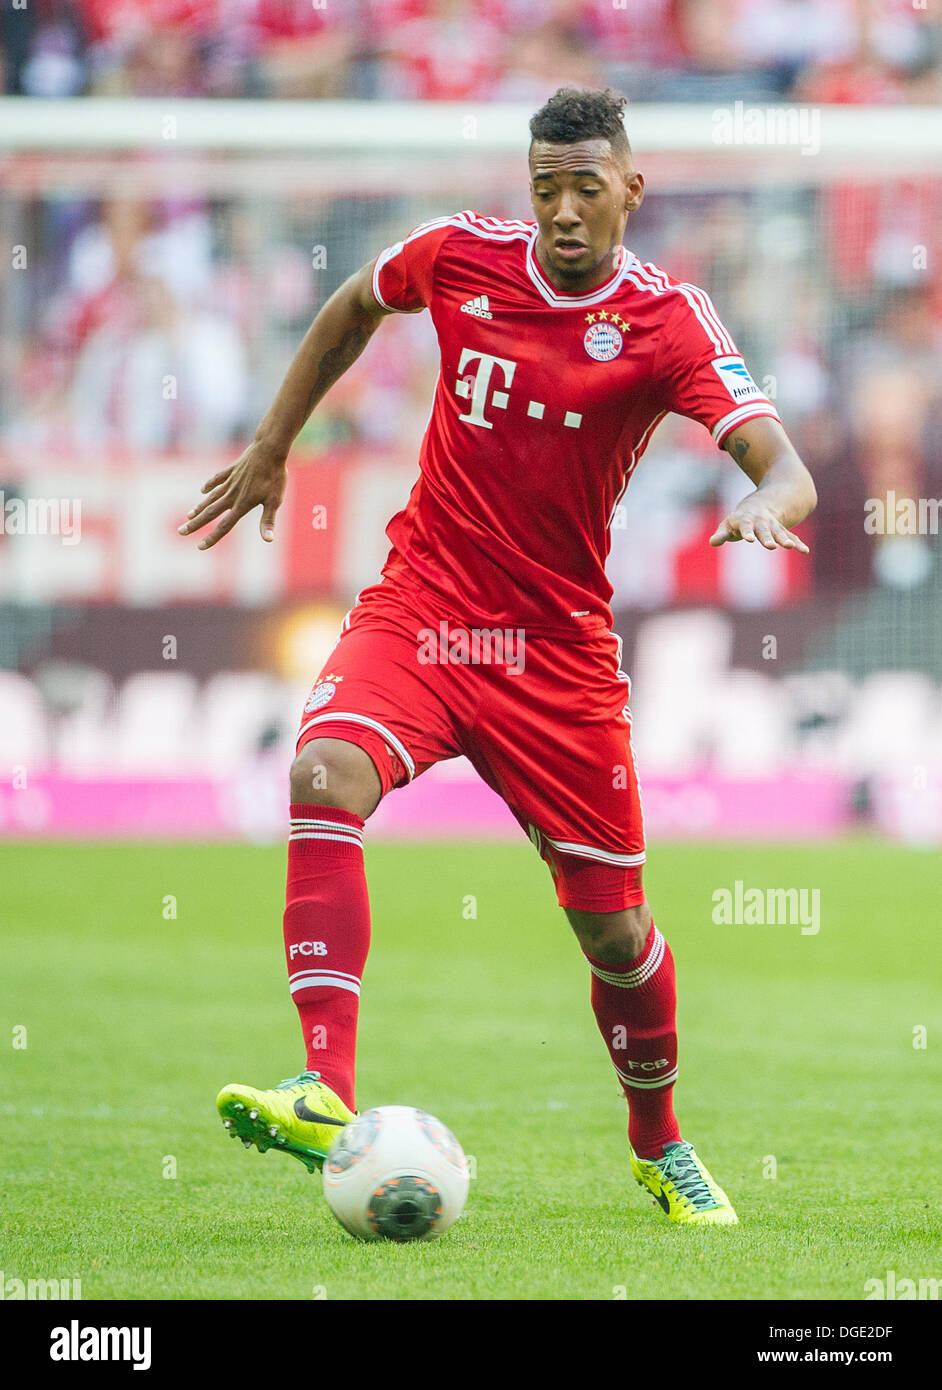 Munich, Germany. 19th Oct, 2013. Munich's Jerome Boateng plays the ball  during the Bundesliga soccer match between Bayern Munich and FSV Mainz 05  at Allianz Arena in Munich, Germany, 19 October 2013.